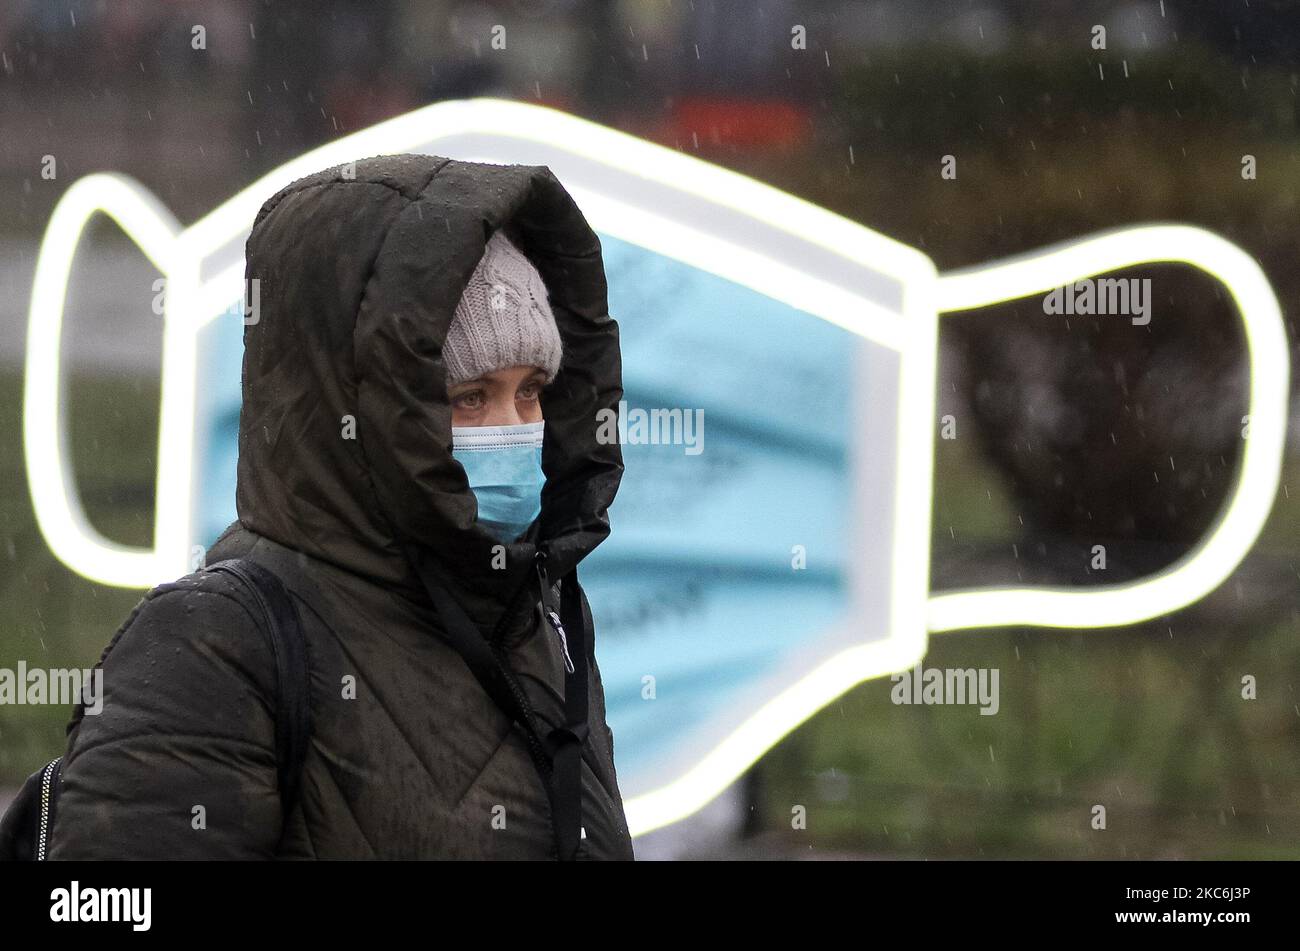 A woman wearing a protective face mask amid the COVID-19 coronavirus epidemic walks next to an art-object of the largest medical mask in Ukraine during an event on Kontraktova Square in the center of Kyiv, Ukraine on 28 December 2020. The event named 'Cover yourself with a mask, not inside yourself' is a part of the social campaign aimed to draw attention to mental health problems during the Covid-19 coronavirus pandemic, as local media reported. The mask letterings like: 'If only not to get sick',' I'm afraid for my parents',' Will I really lose my job?','When will I see my grandchildren?', ' Stock Photo